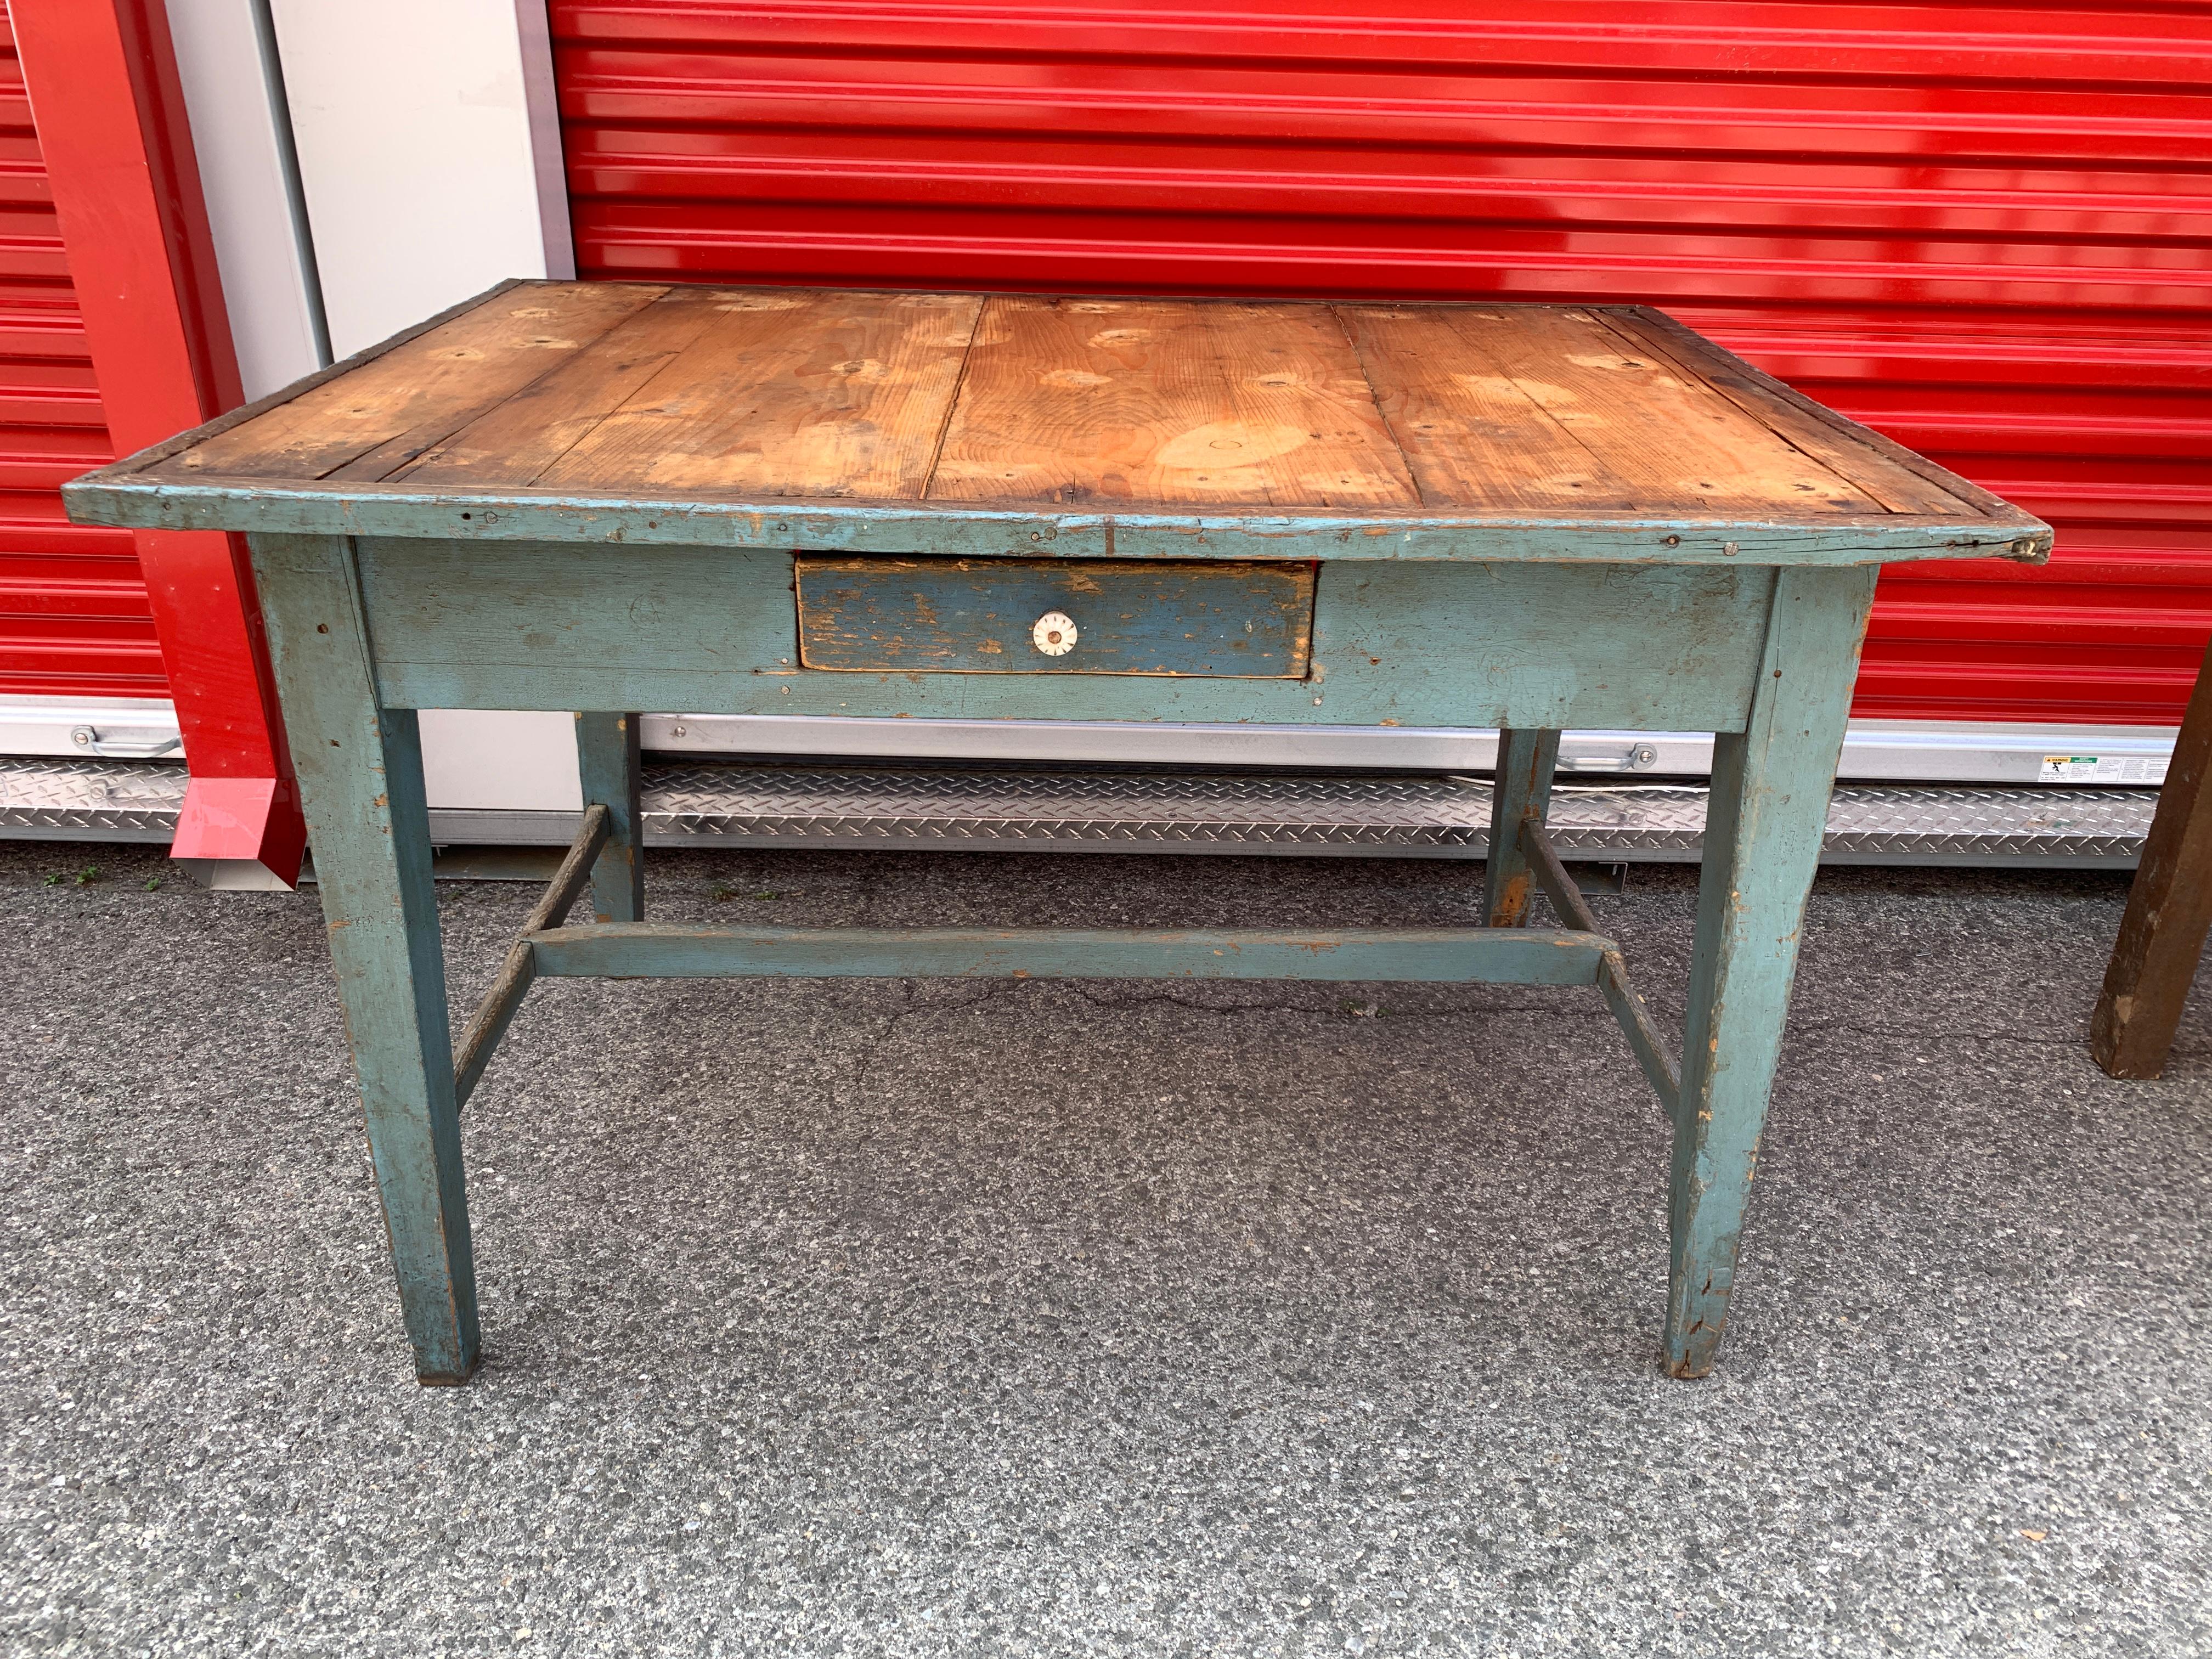 An occasional table with perfectly aged oak wood that would go well as an entry table, desk or small kitchen island. Original light blue paint which would compliment a bohemian chic household.
Drawer comes with dividers.